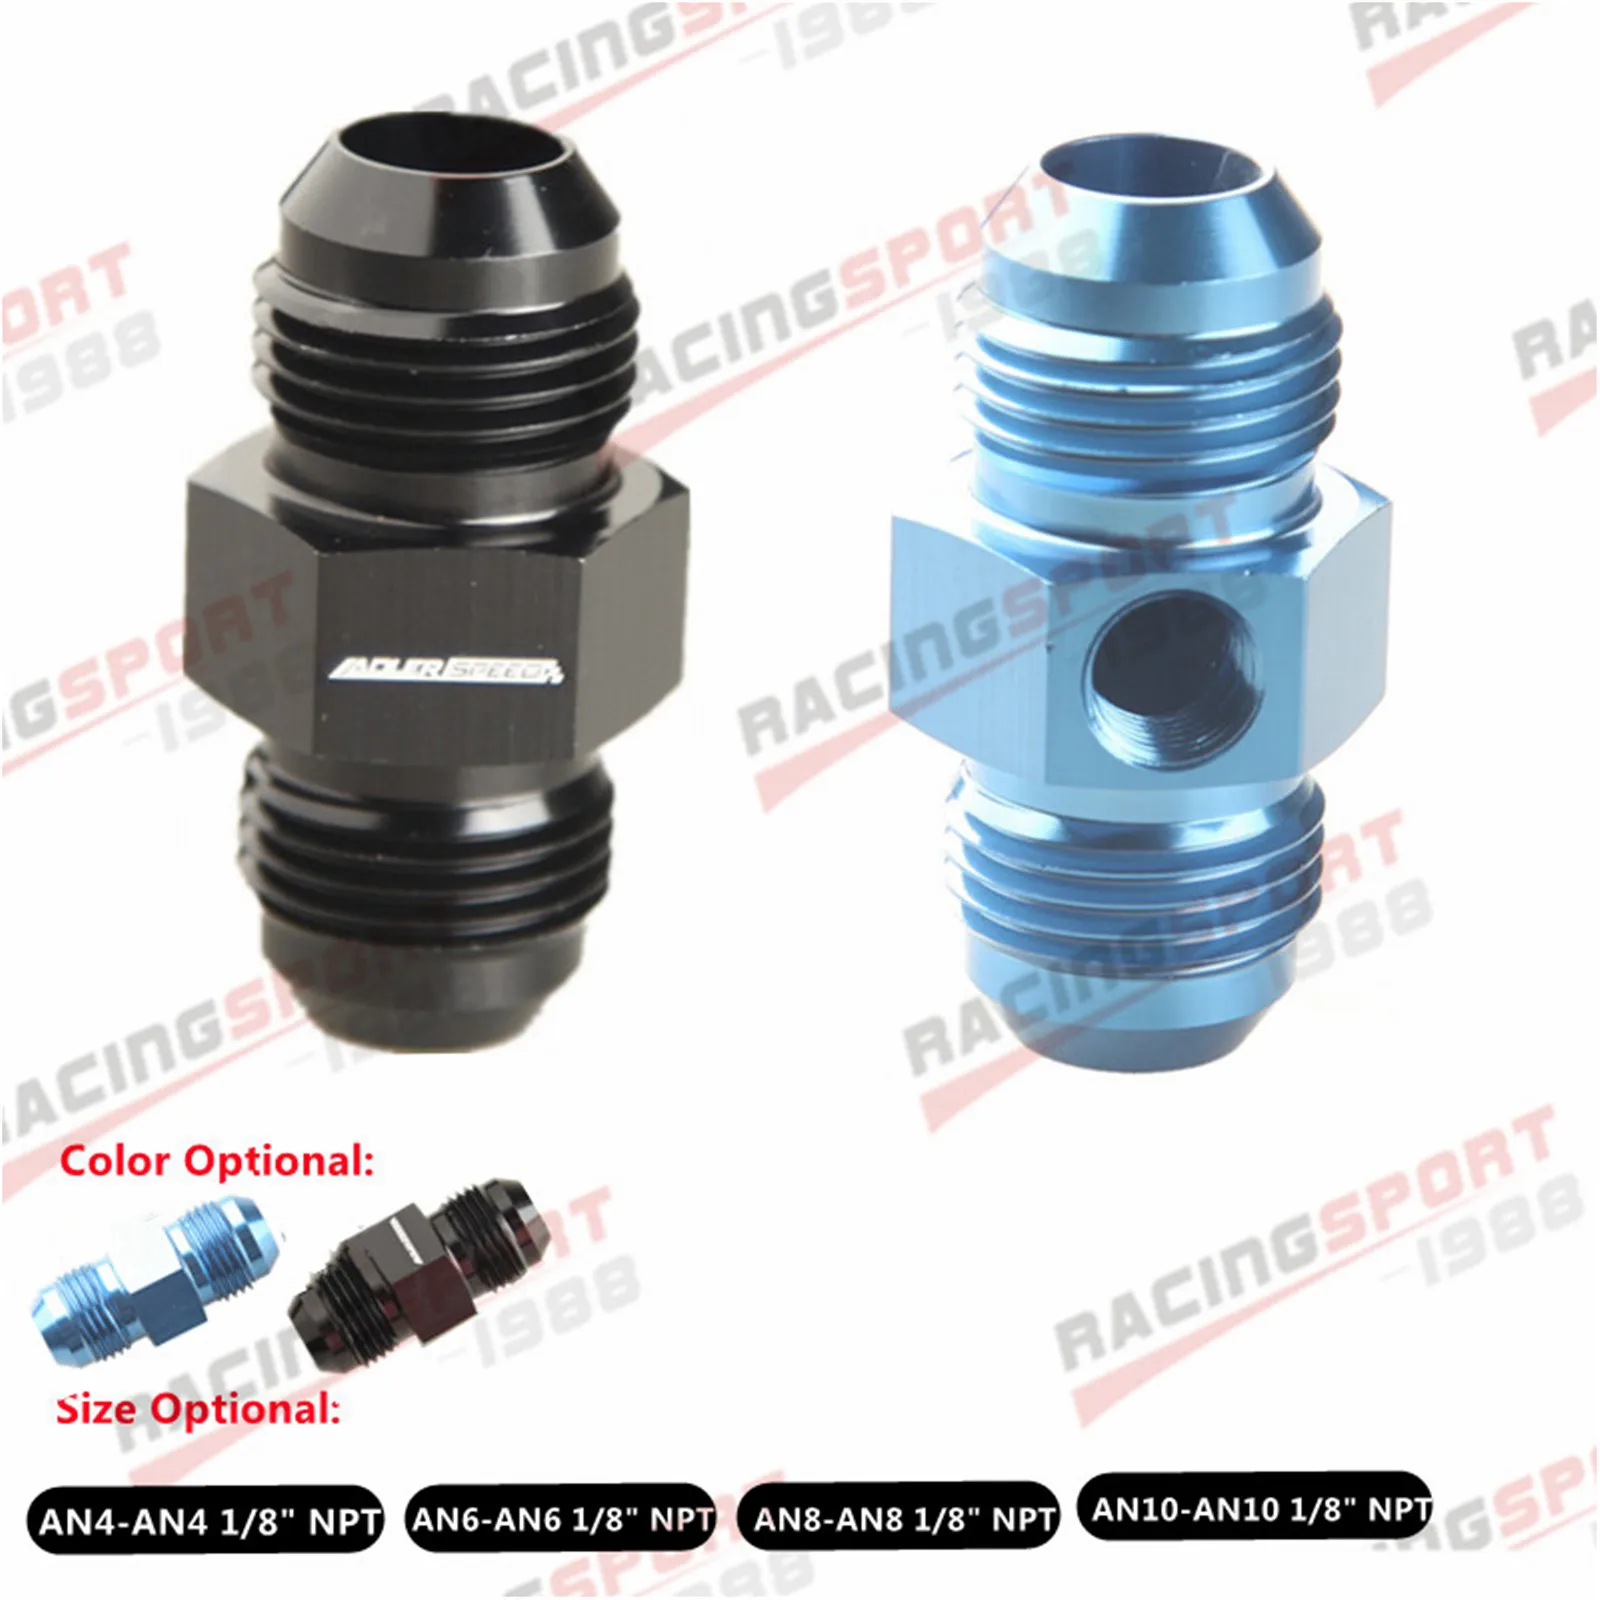 

ADLER SPEED AN4 AN6 AN8 AN10 Male To Male With 1/8" NPT Port Adapter Fuel Pressure Gauge Fitting Blue/Black